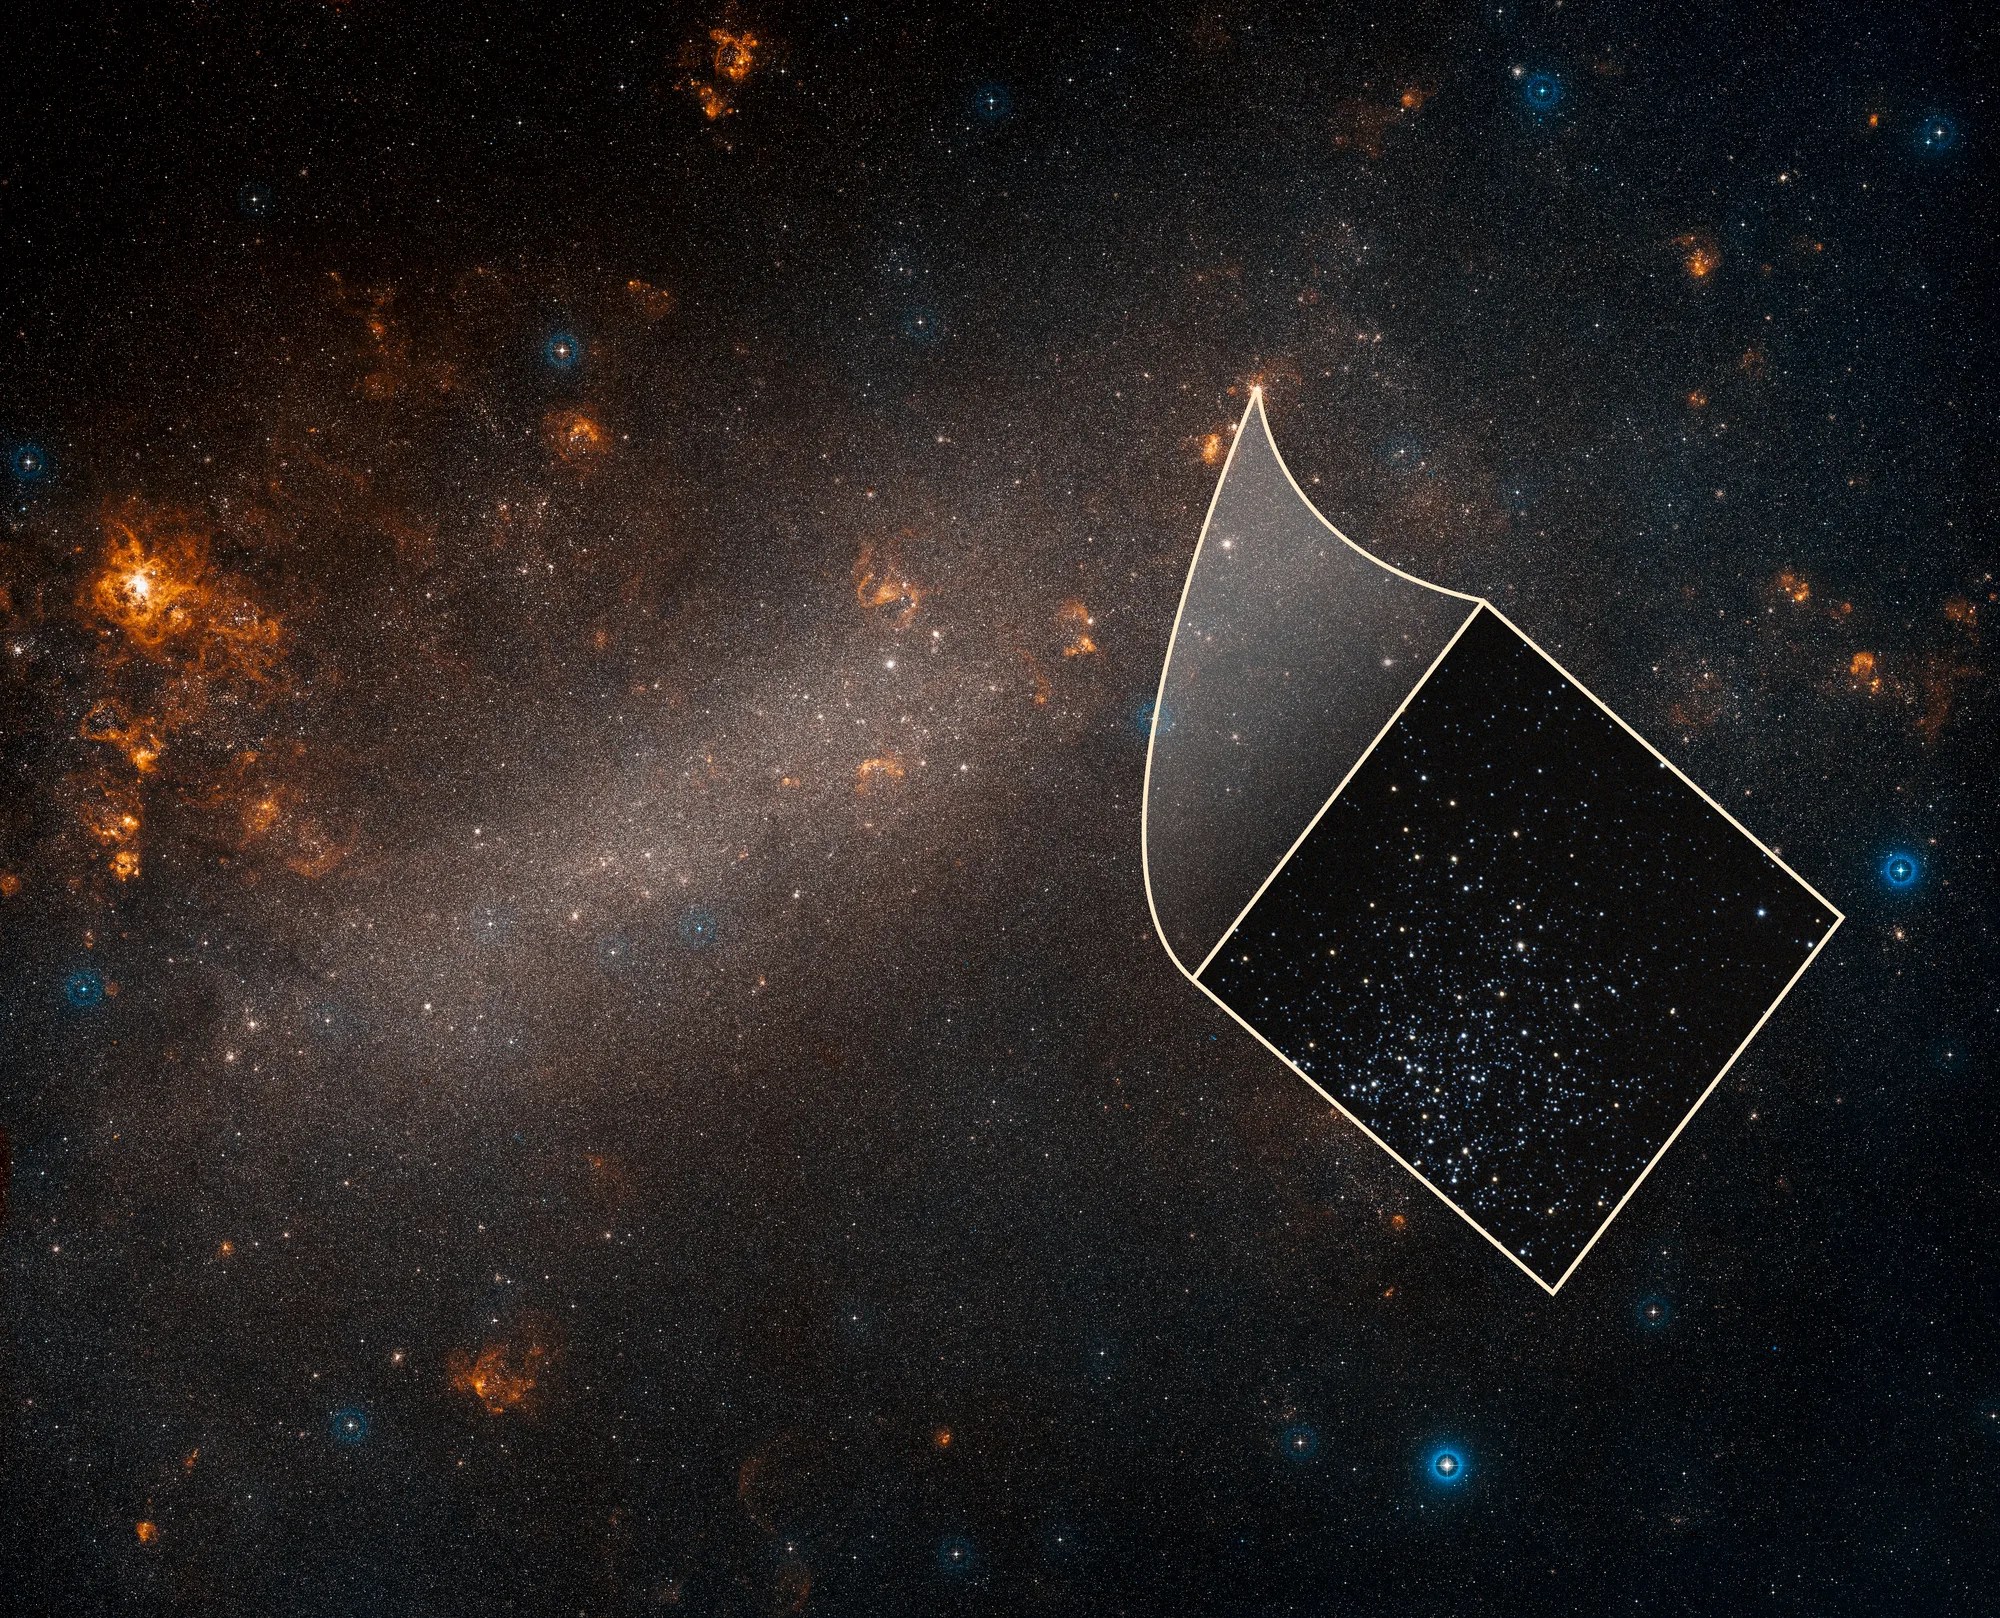 ground-based view of LMC with inset image from Hubble